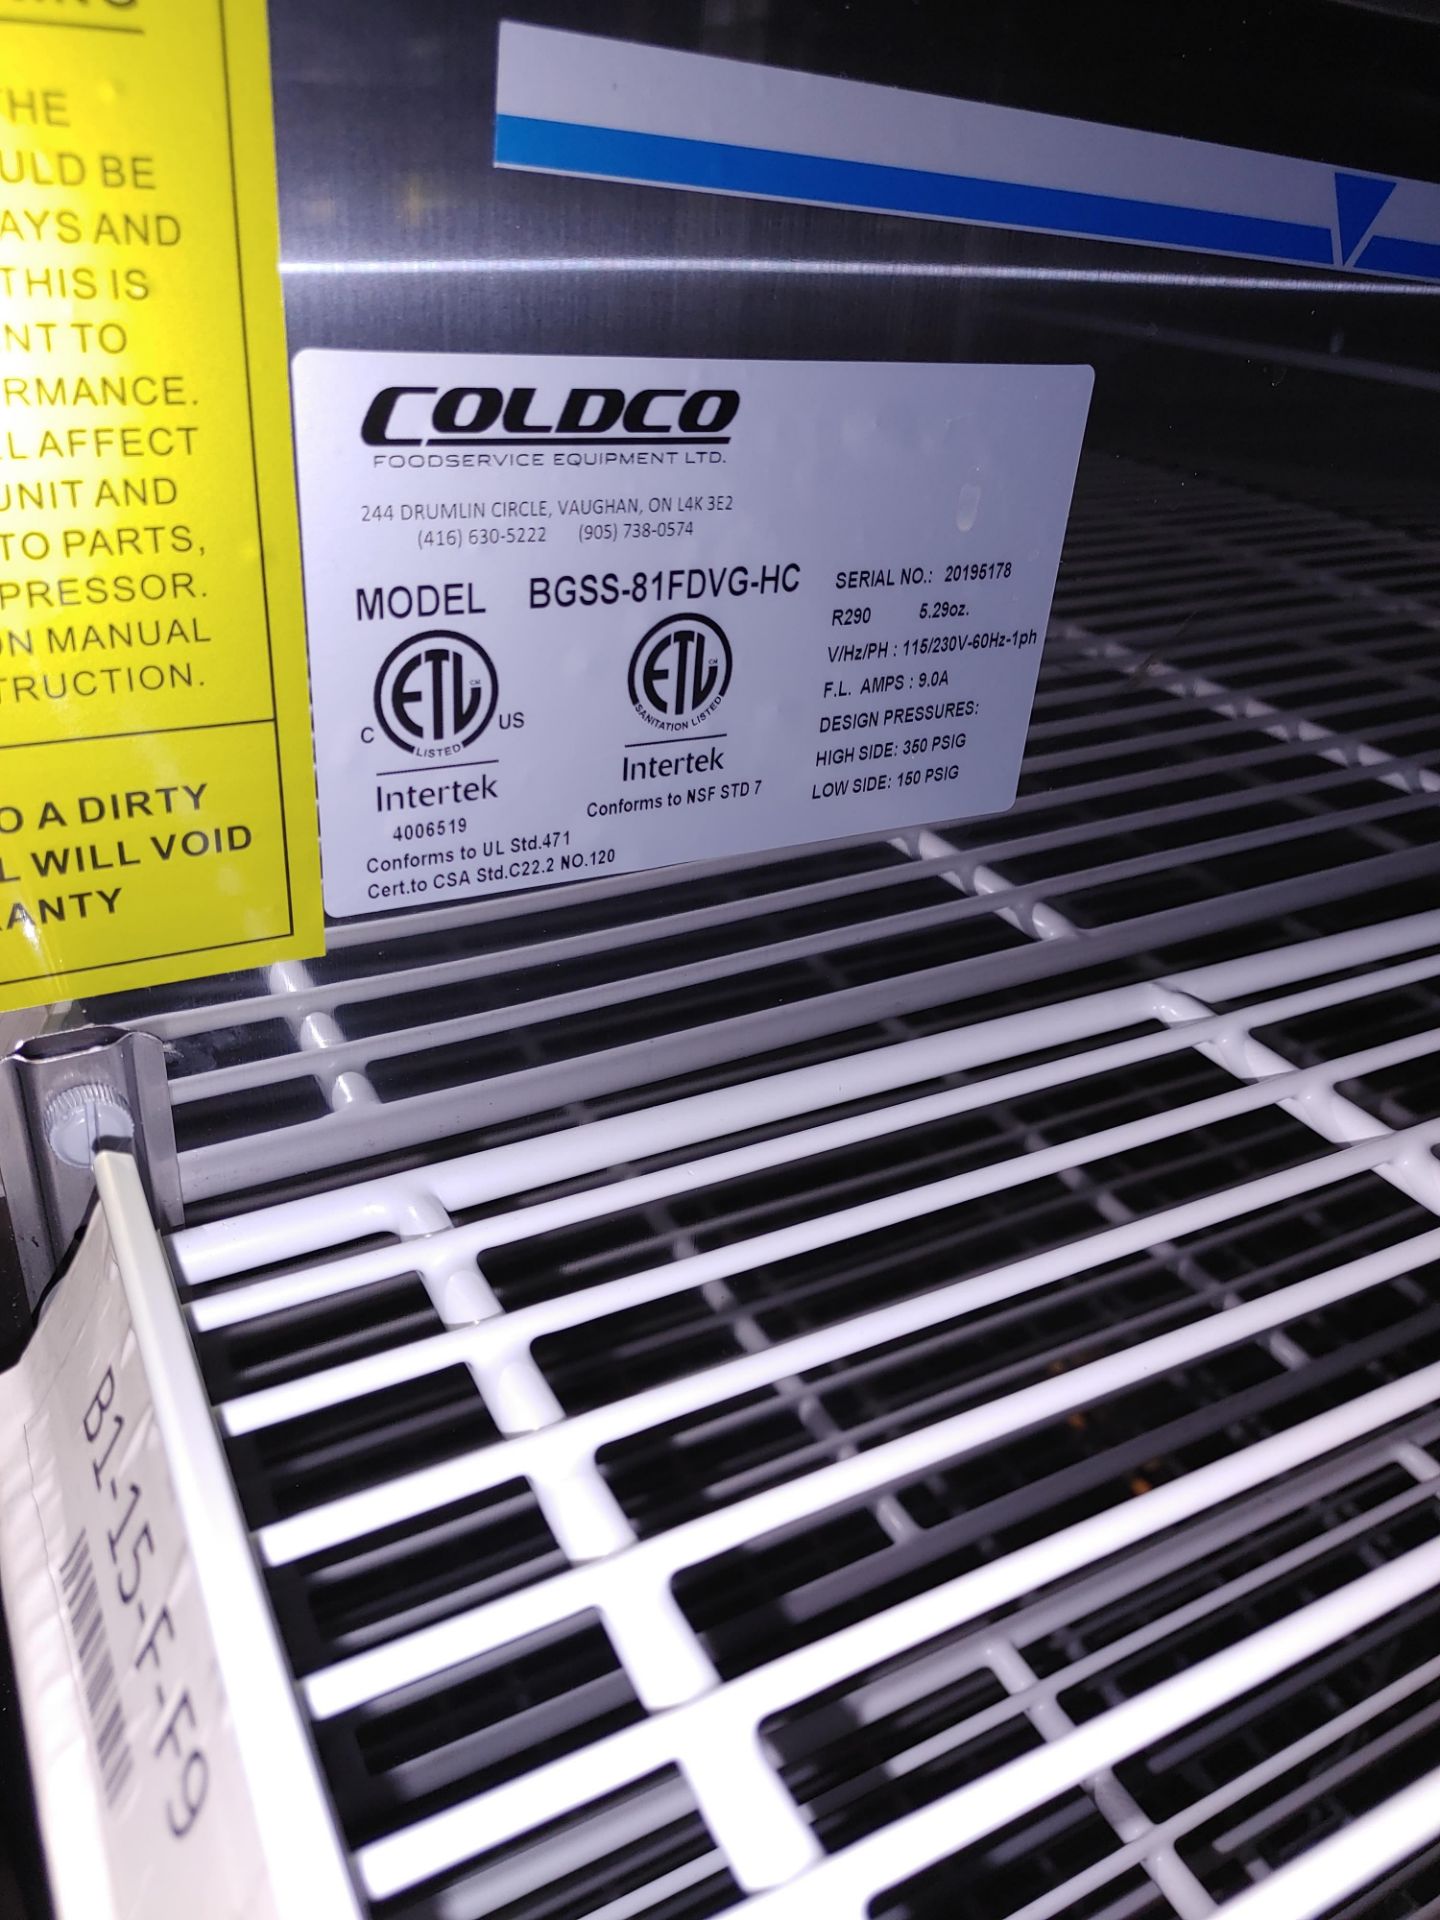 Coldco "BGSS-81FDVG-HC" 3 Door Glass Front Freezer Stainless Steel S/N 20195178 - Image 2 of 2